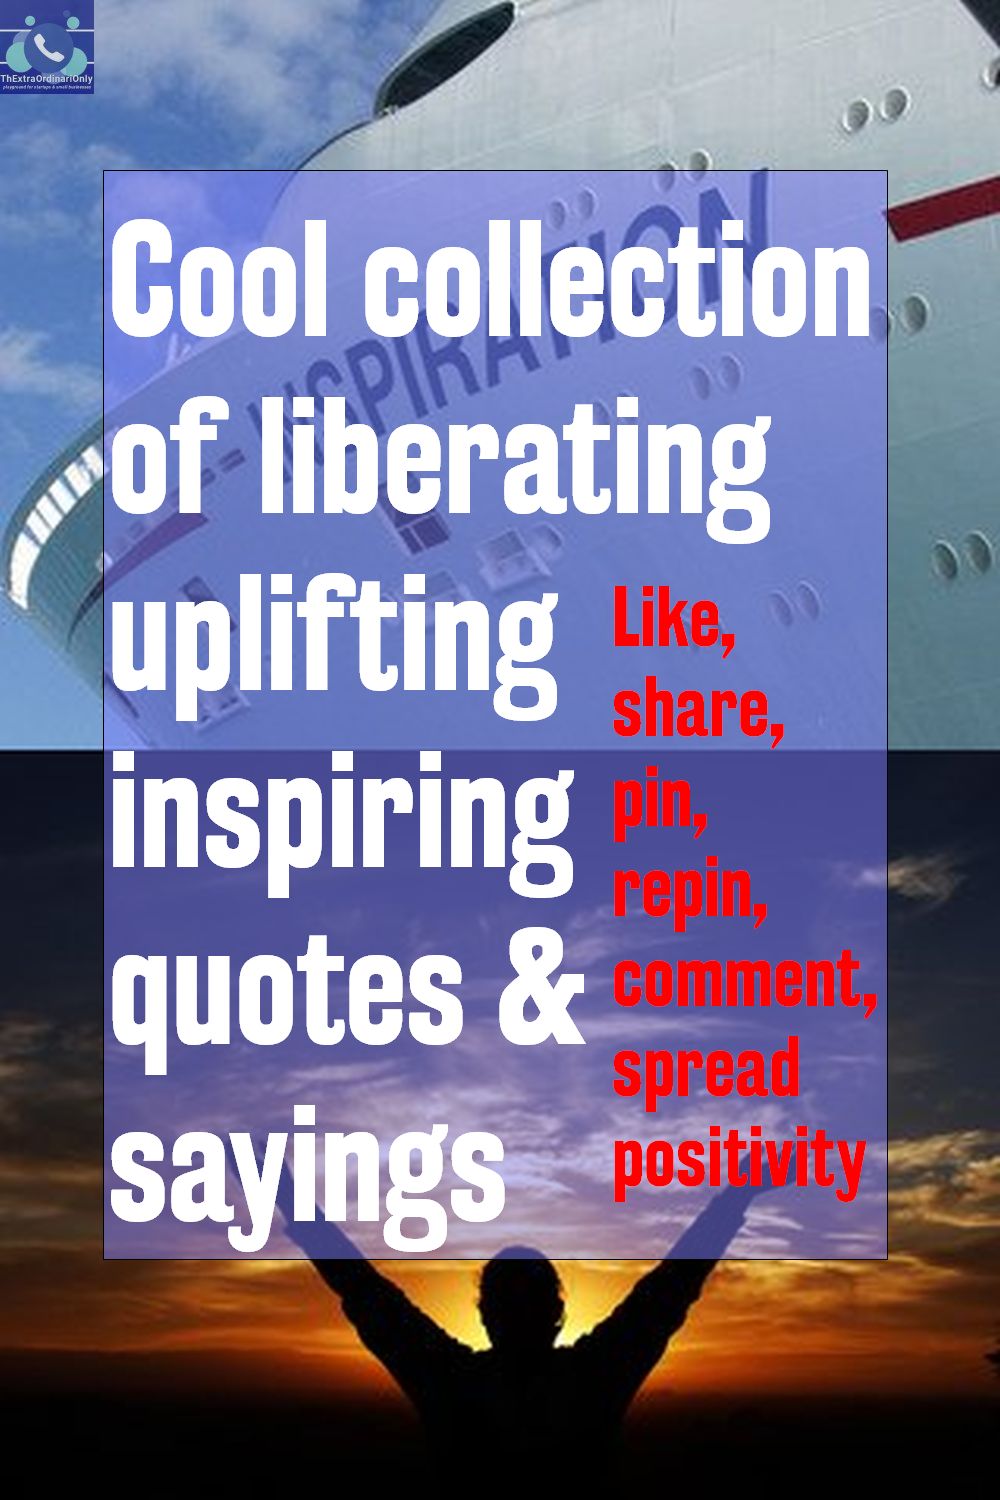 super cool collection of free uplifting inspirational quotes and sayings